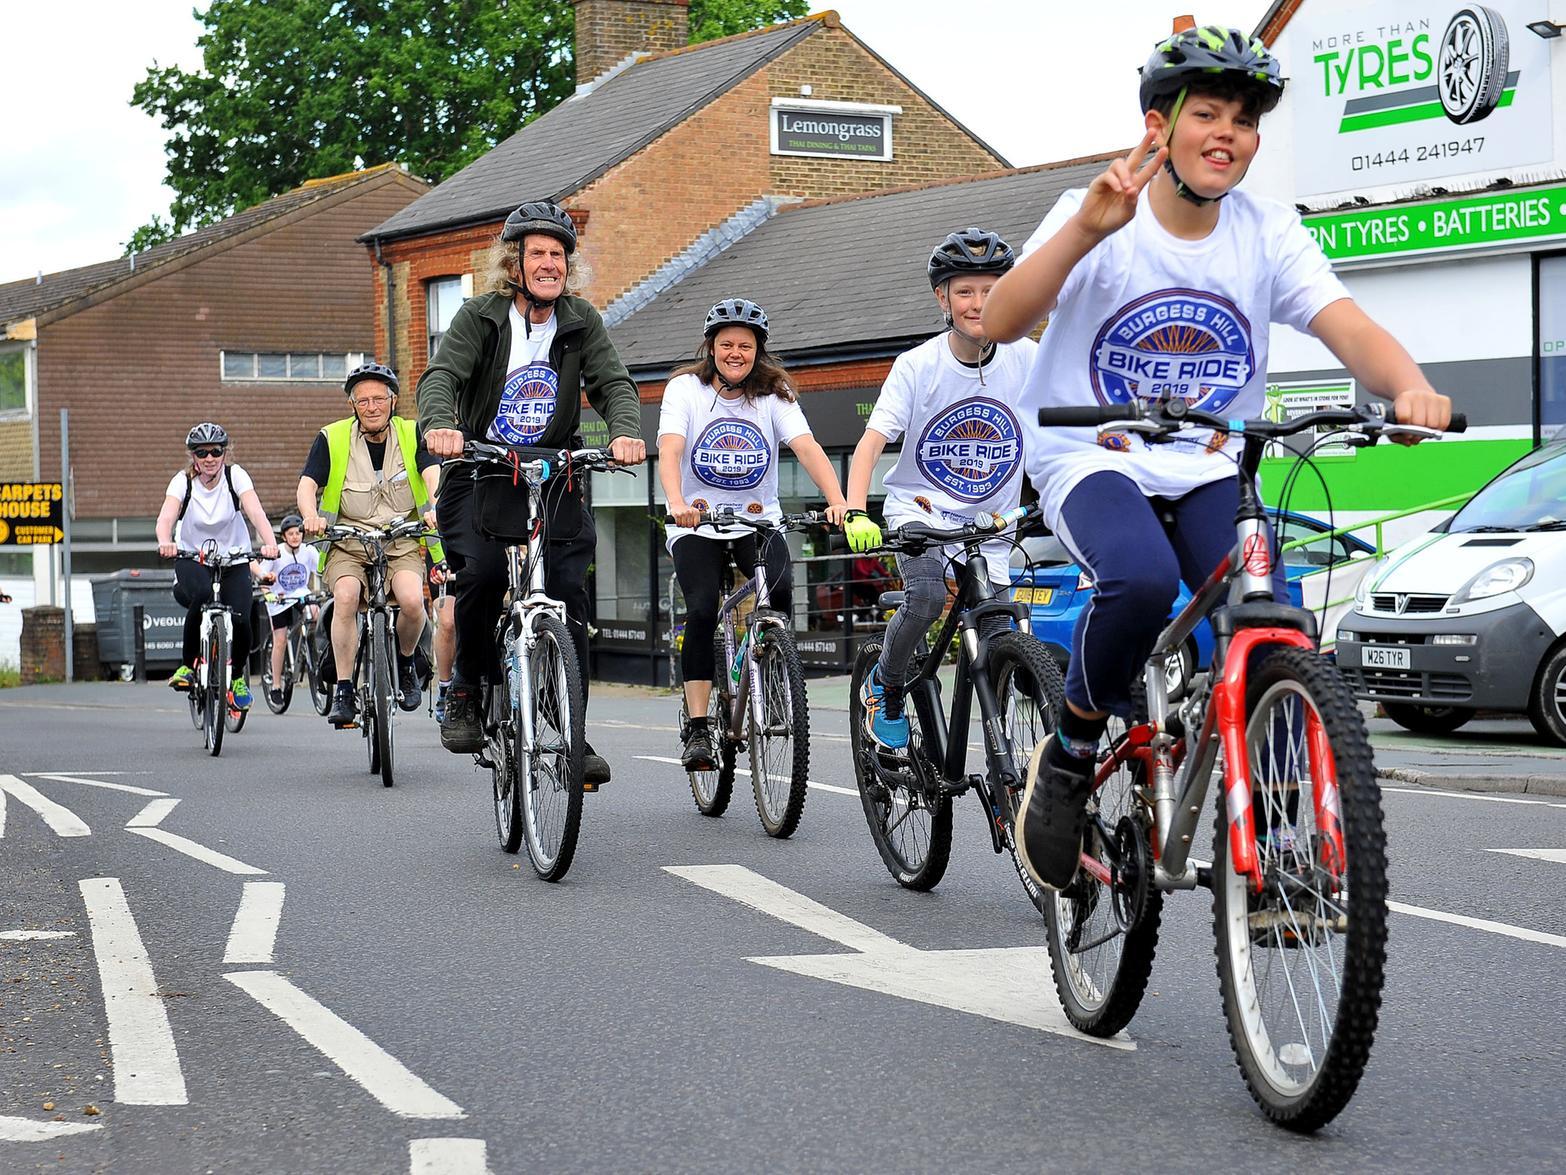 Burgess Hill Bike Ride will not happen in 2020. To find out more, read our story: https://www.midsussextimes.co.uk/news/people/haywards-heath-and-burgess-hill-bike-rides-postponed-until-2021-1363405.